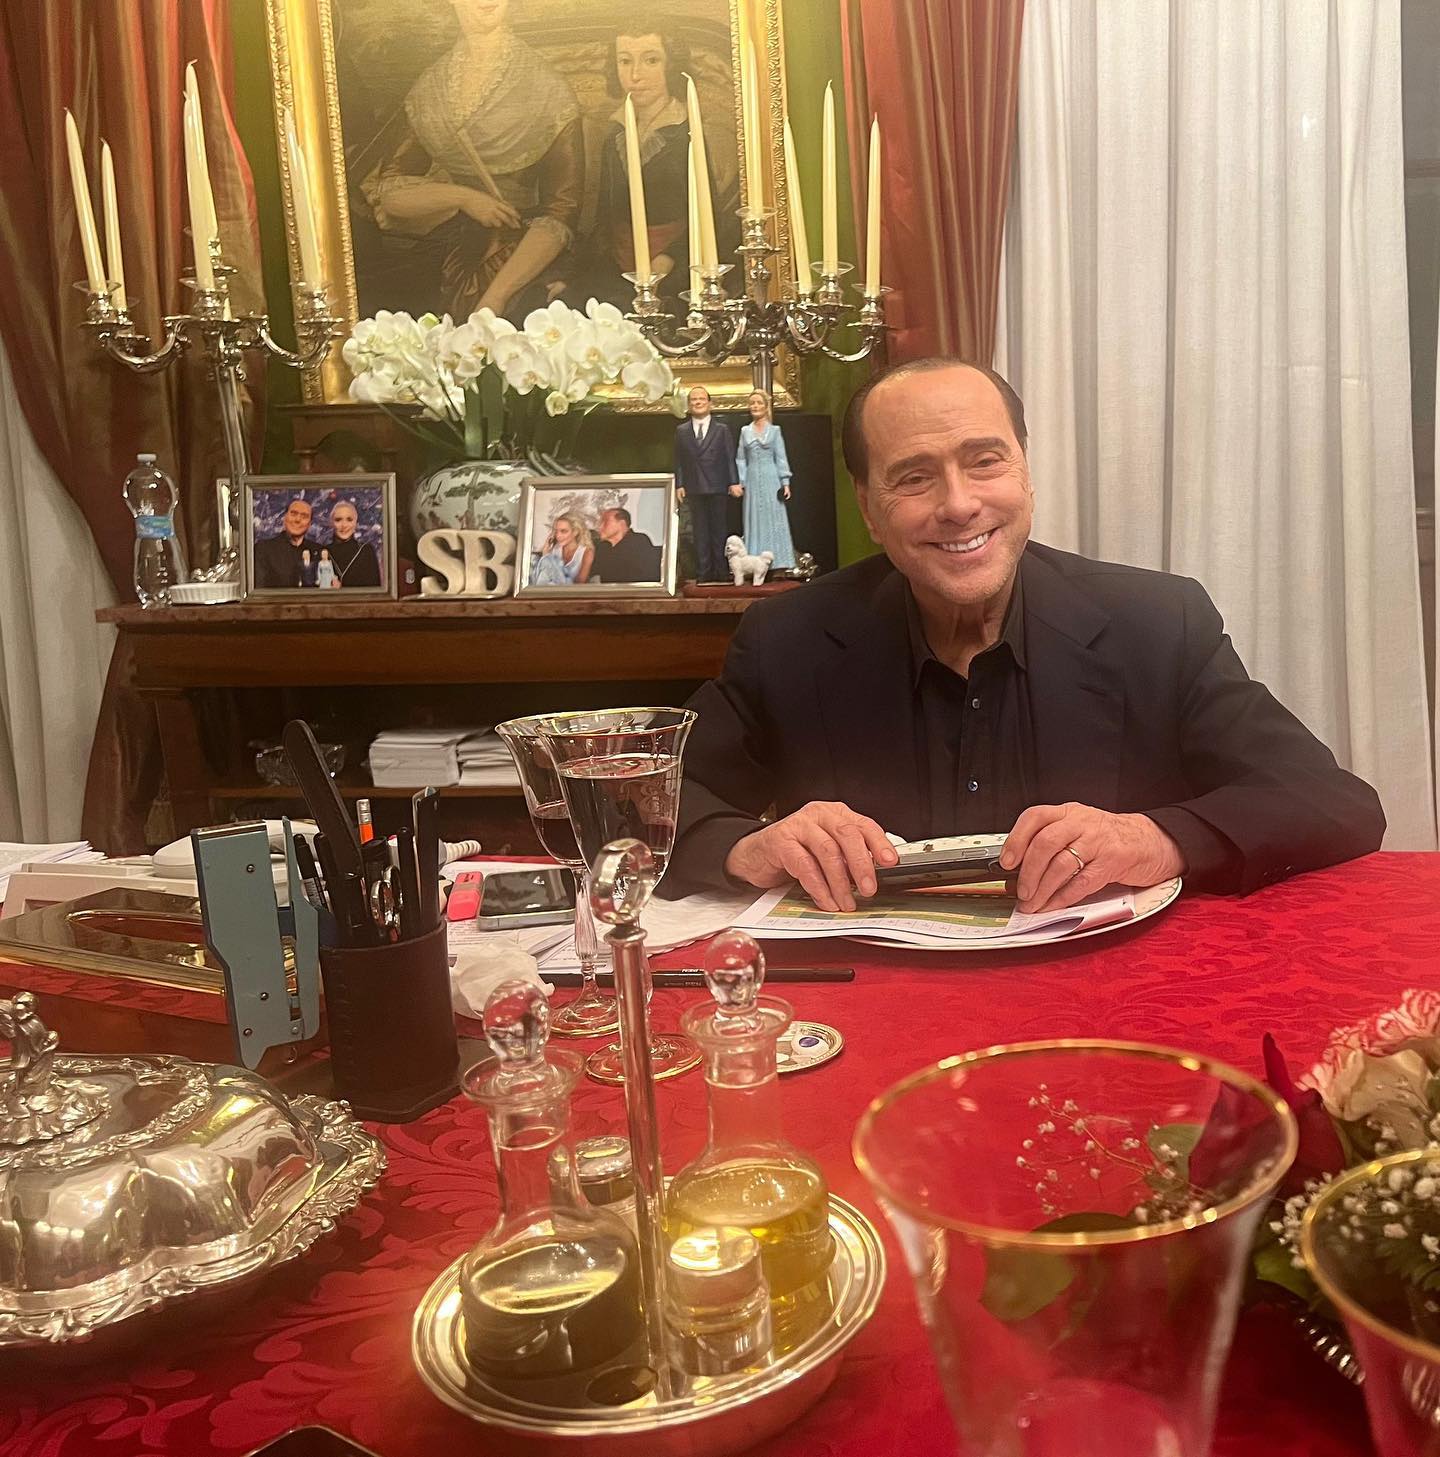 Photo by Silvio Berlusconi on March 31 2023. May be an image of candle holder and tablecloth